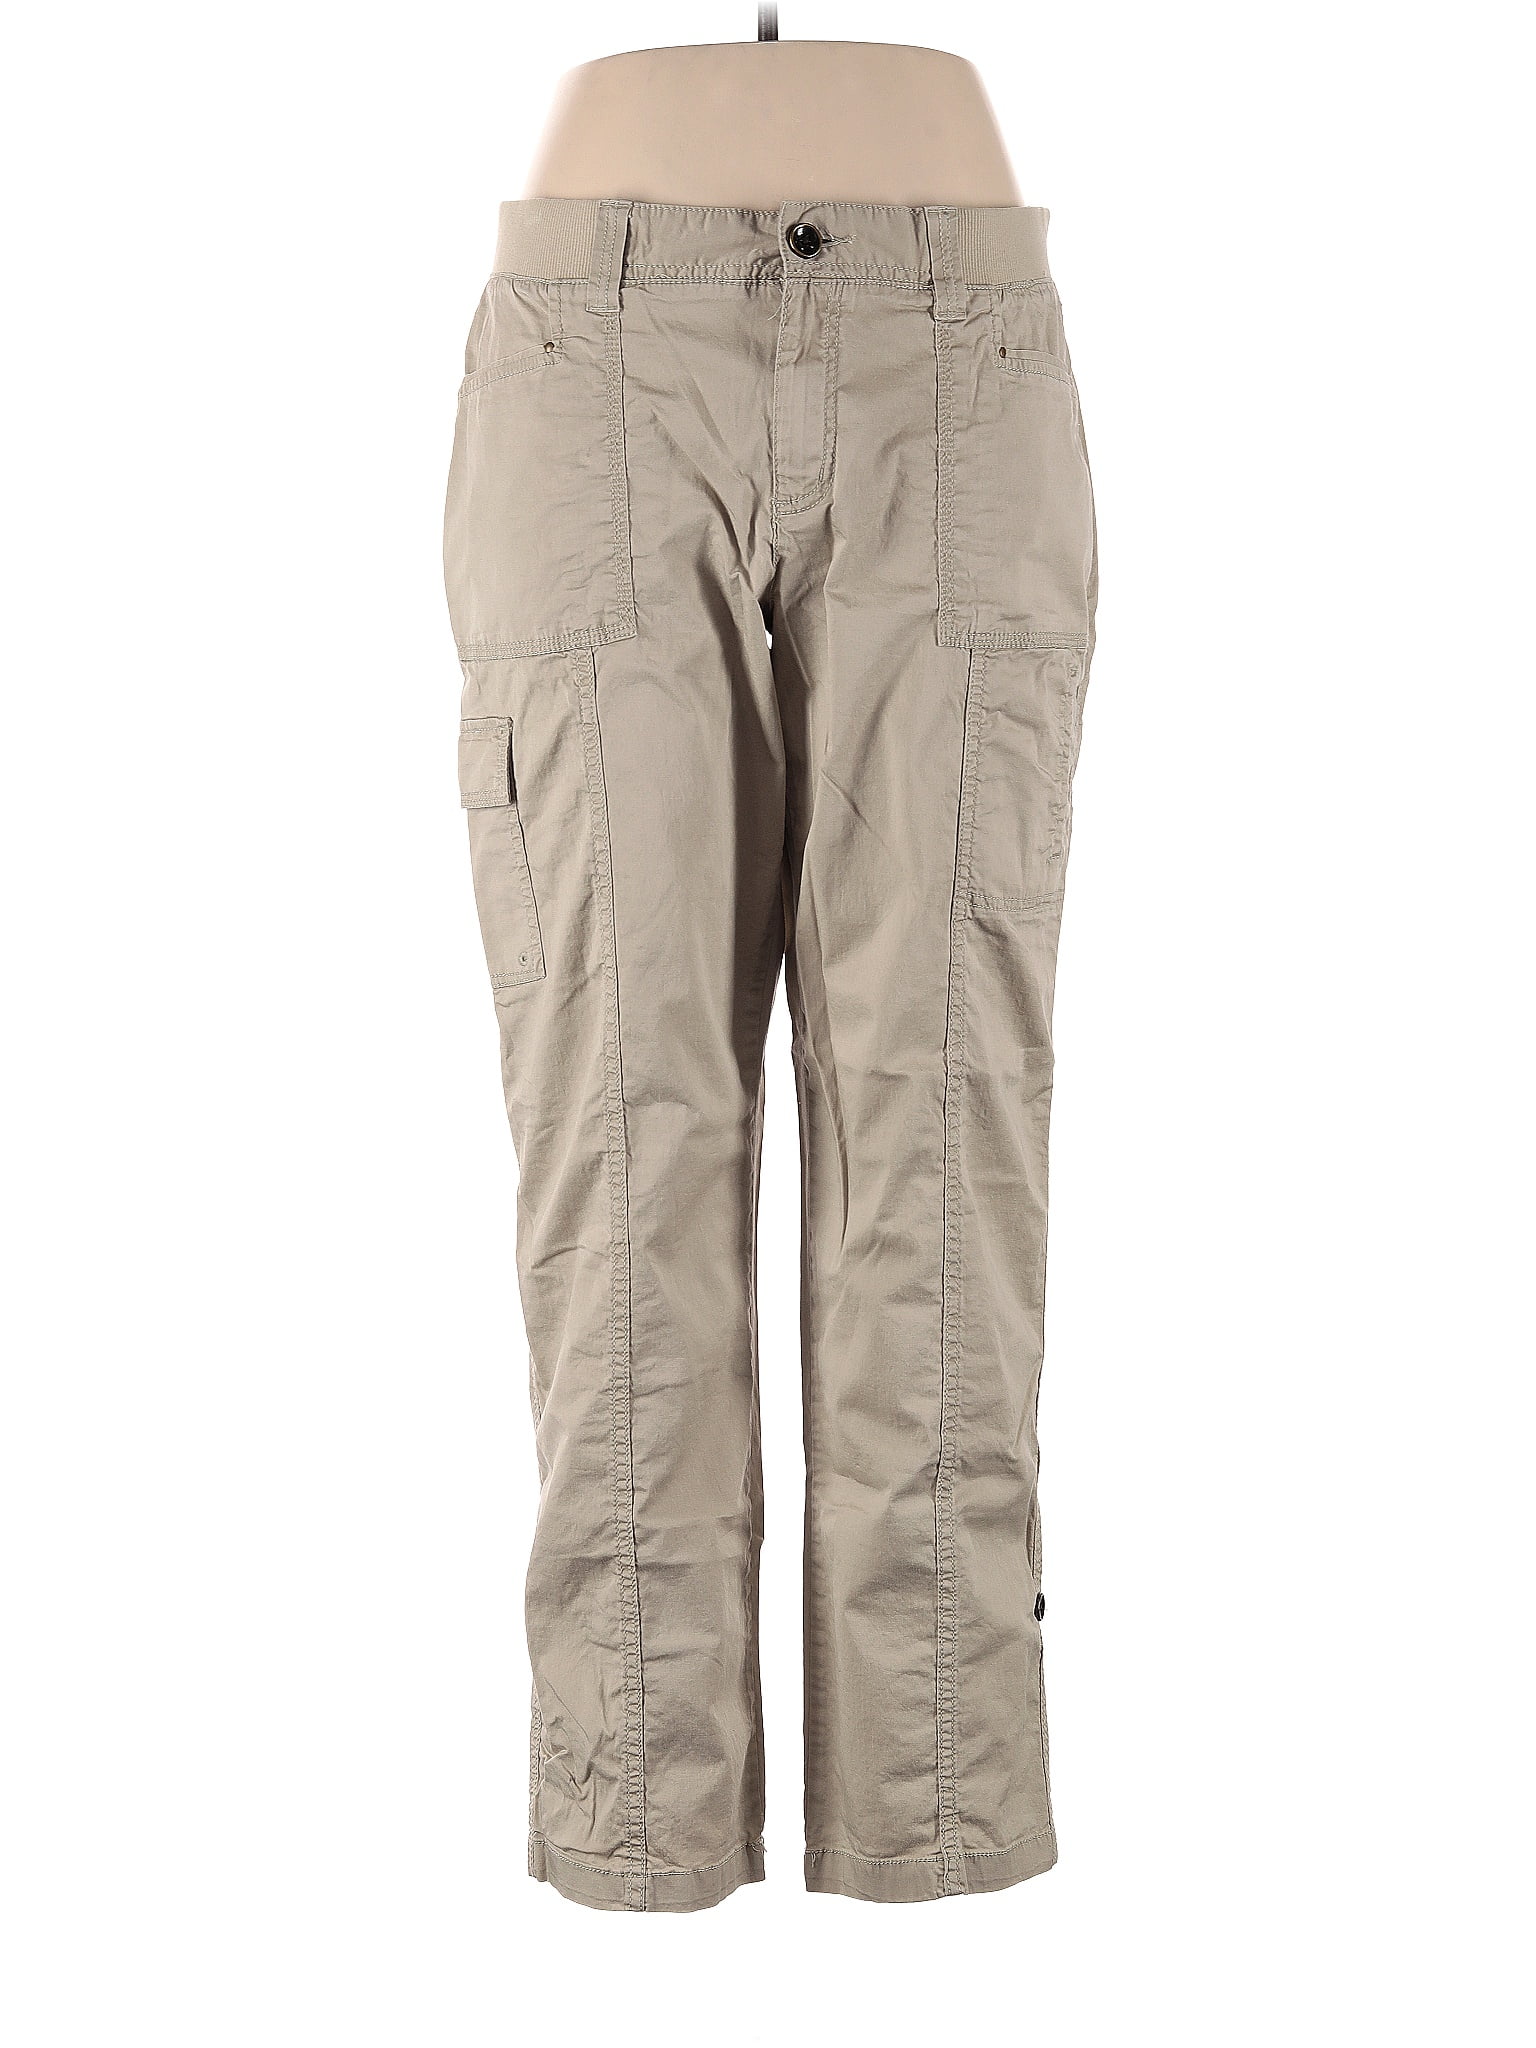 Sonoma Cargo Pants by milesbaguette